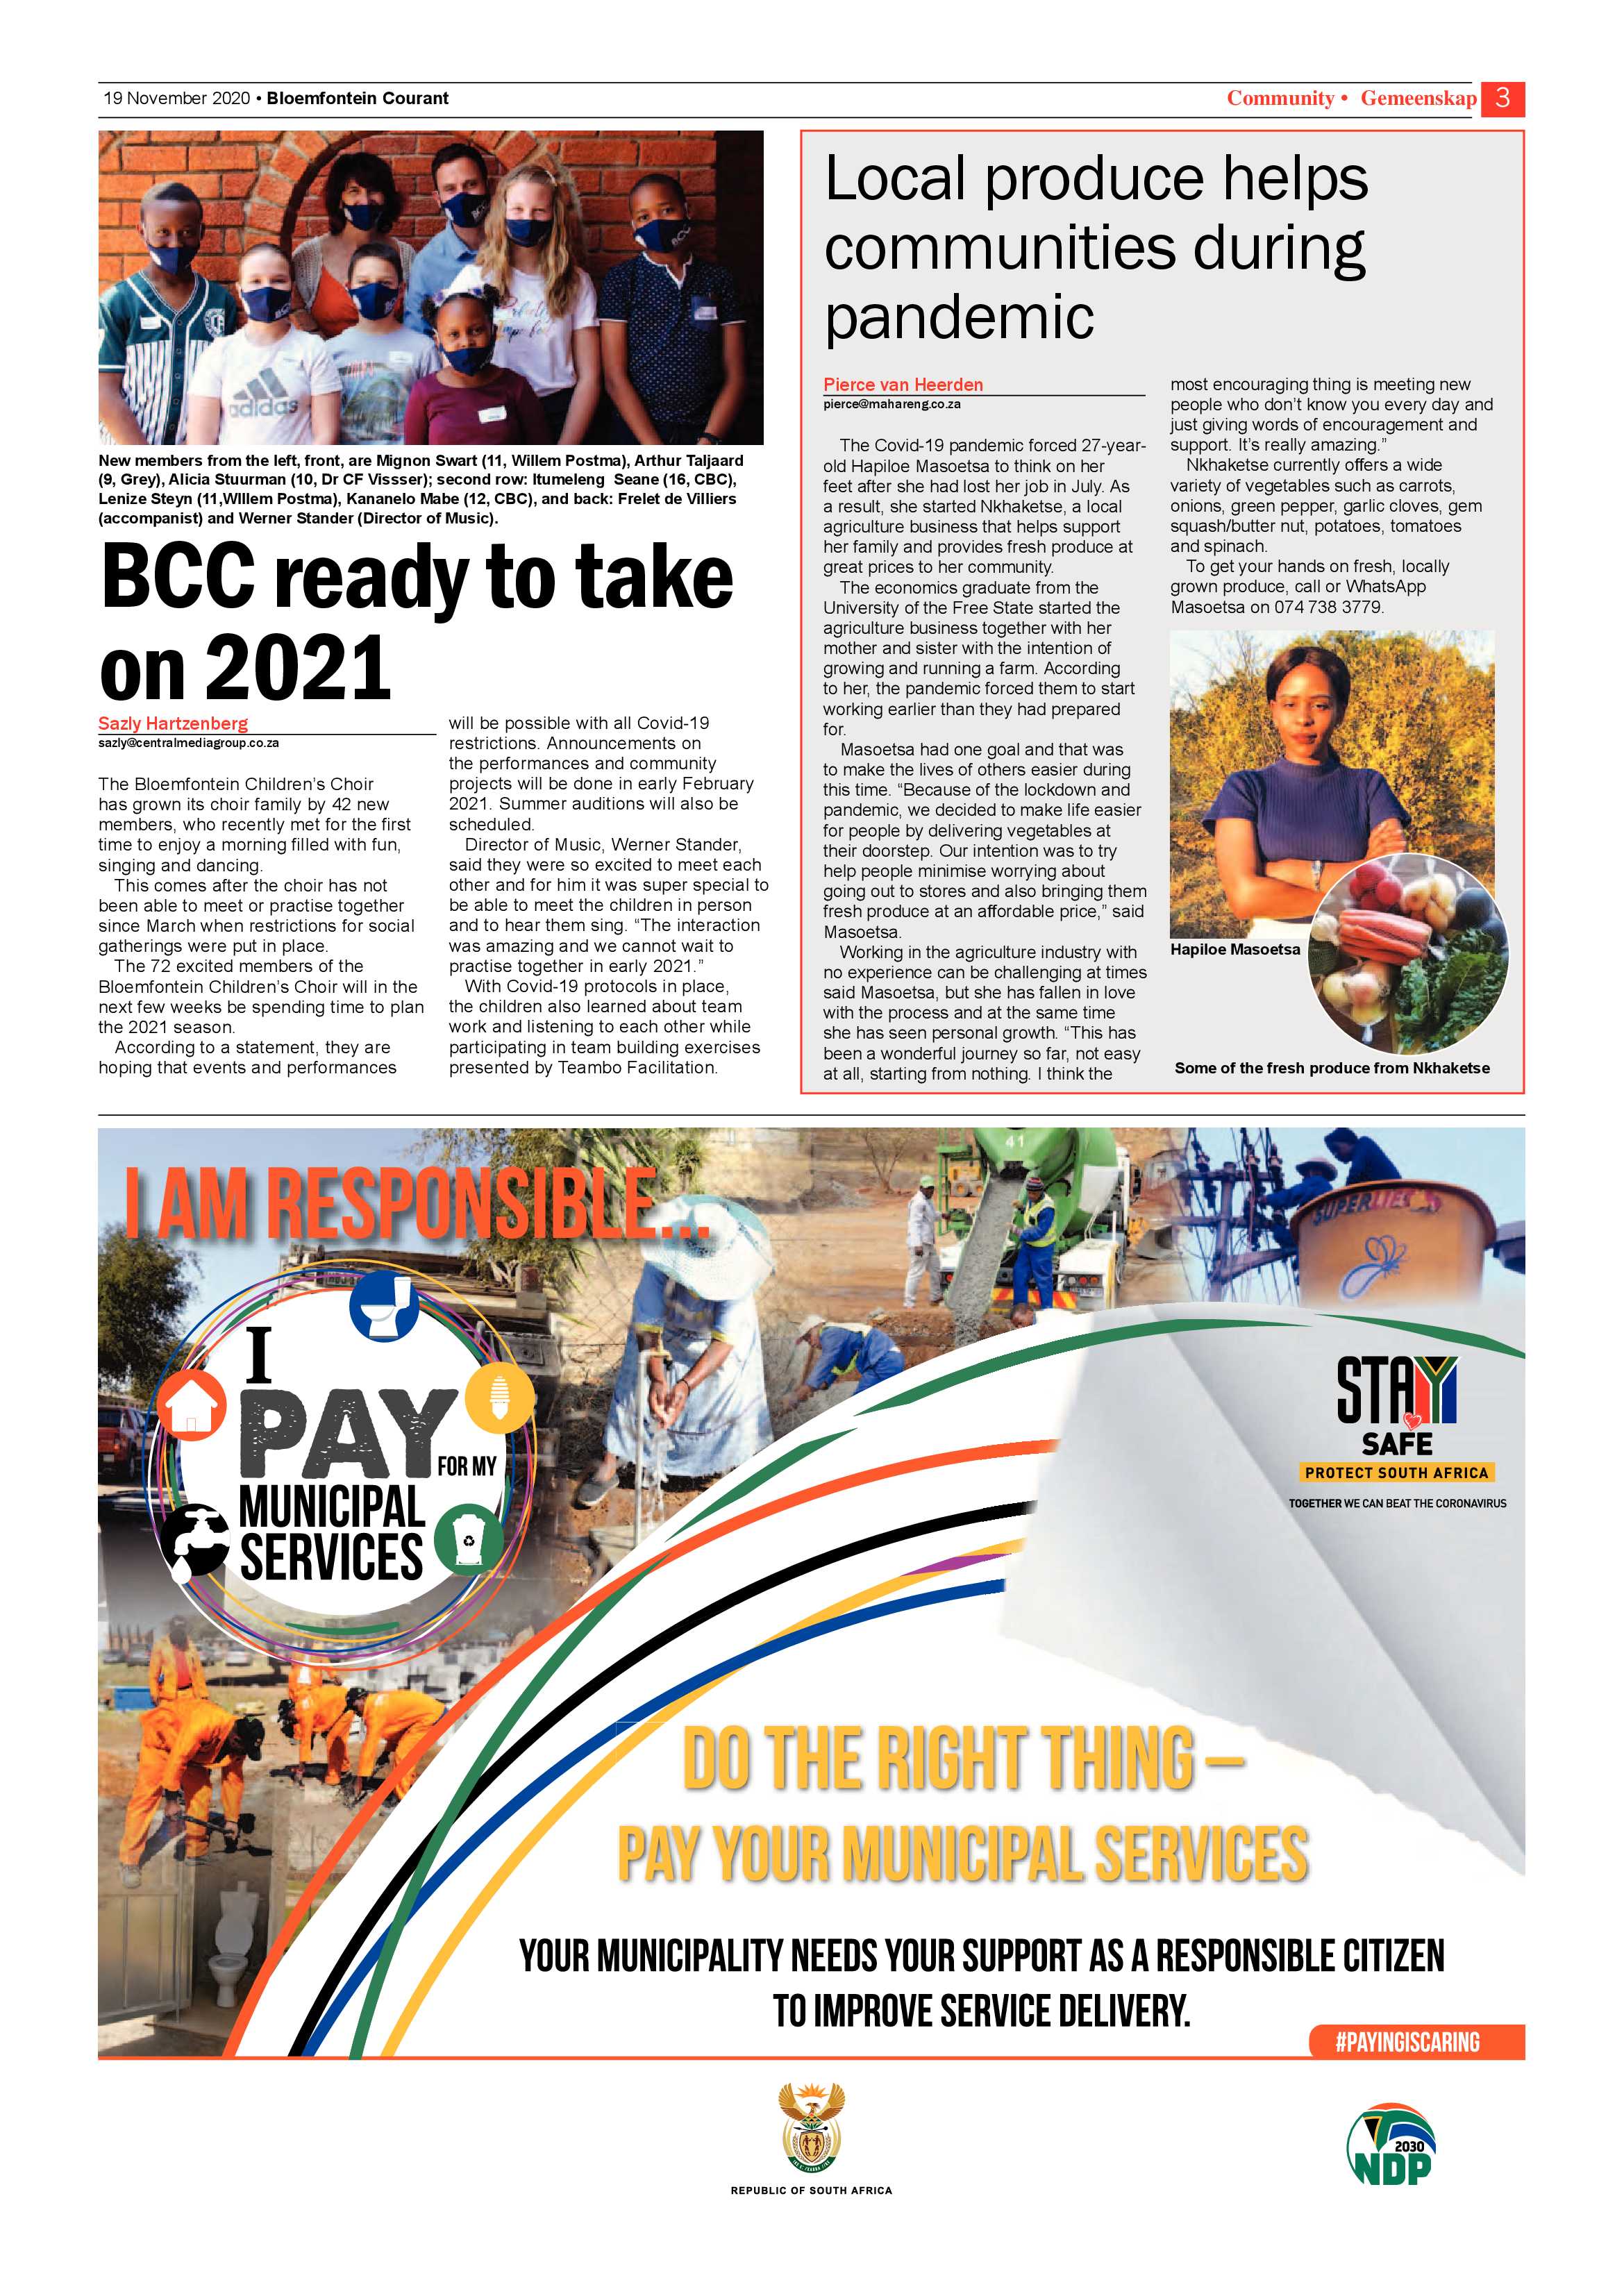 courant-19-november-2020-epapers-page-3